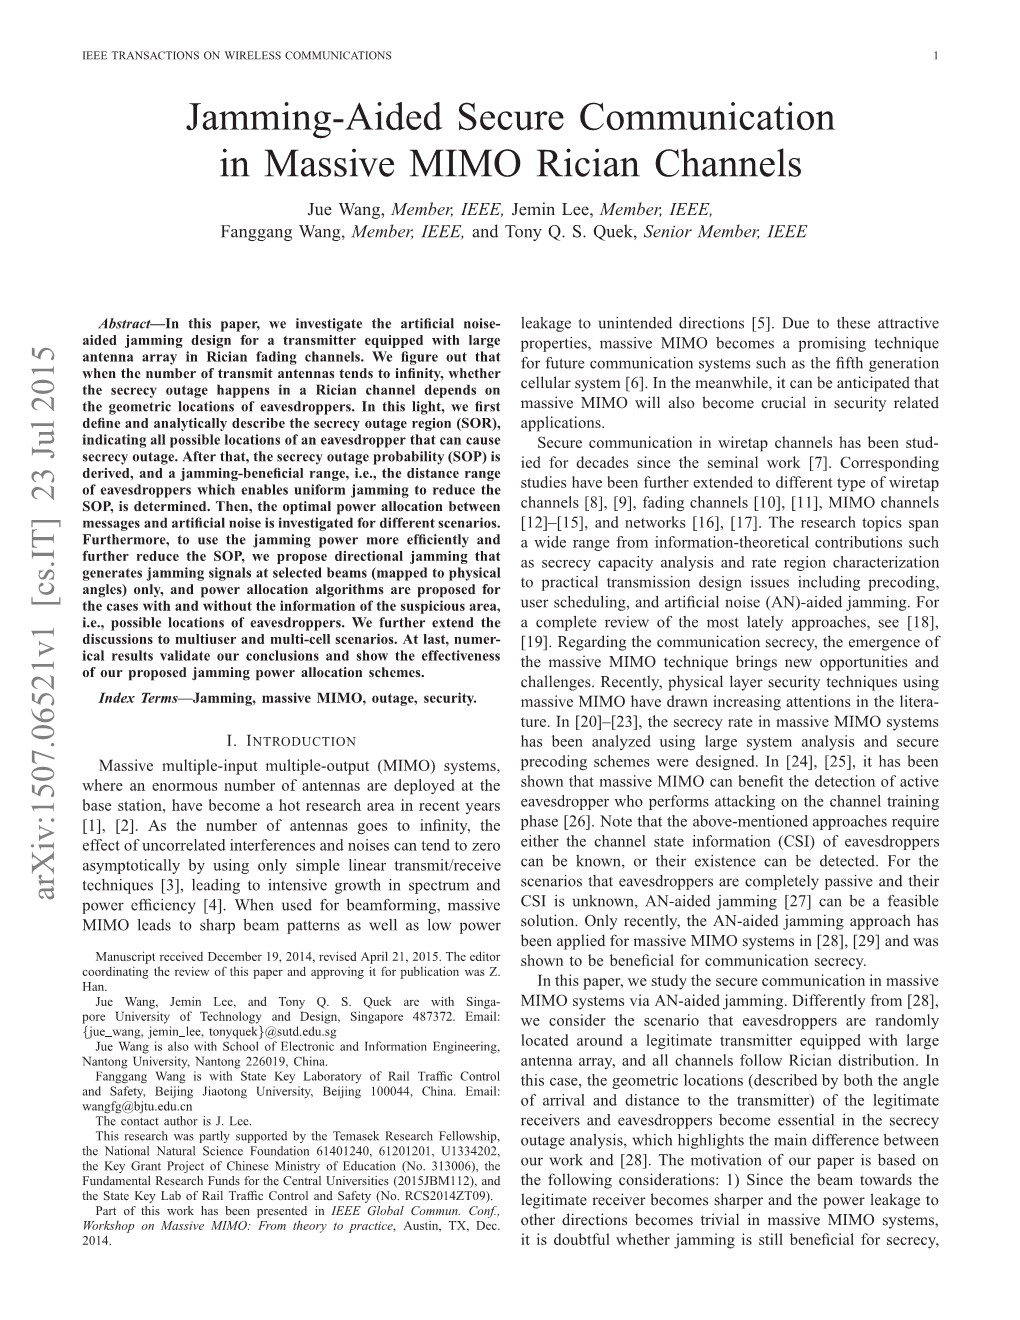 Jamming-Aided Secure Communication in Massive MIMO